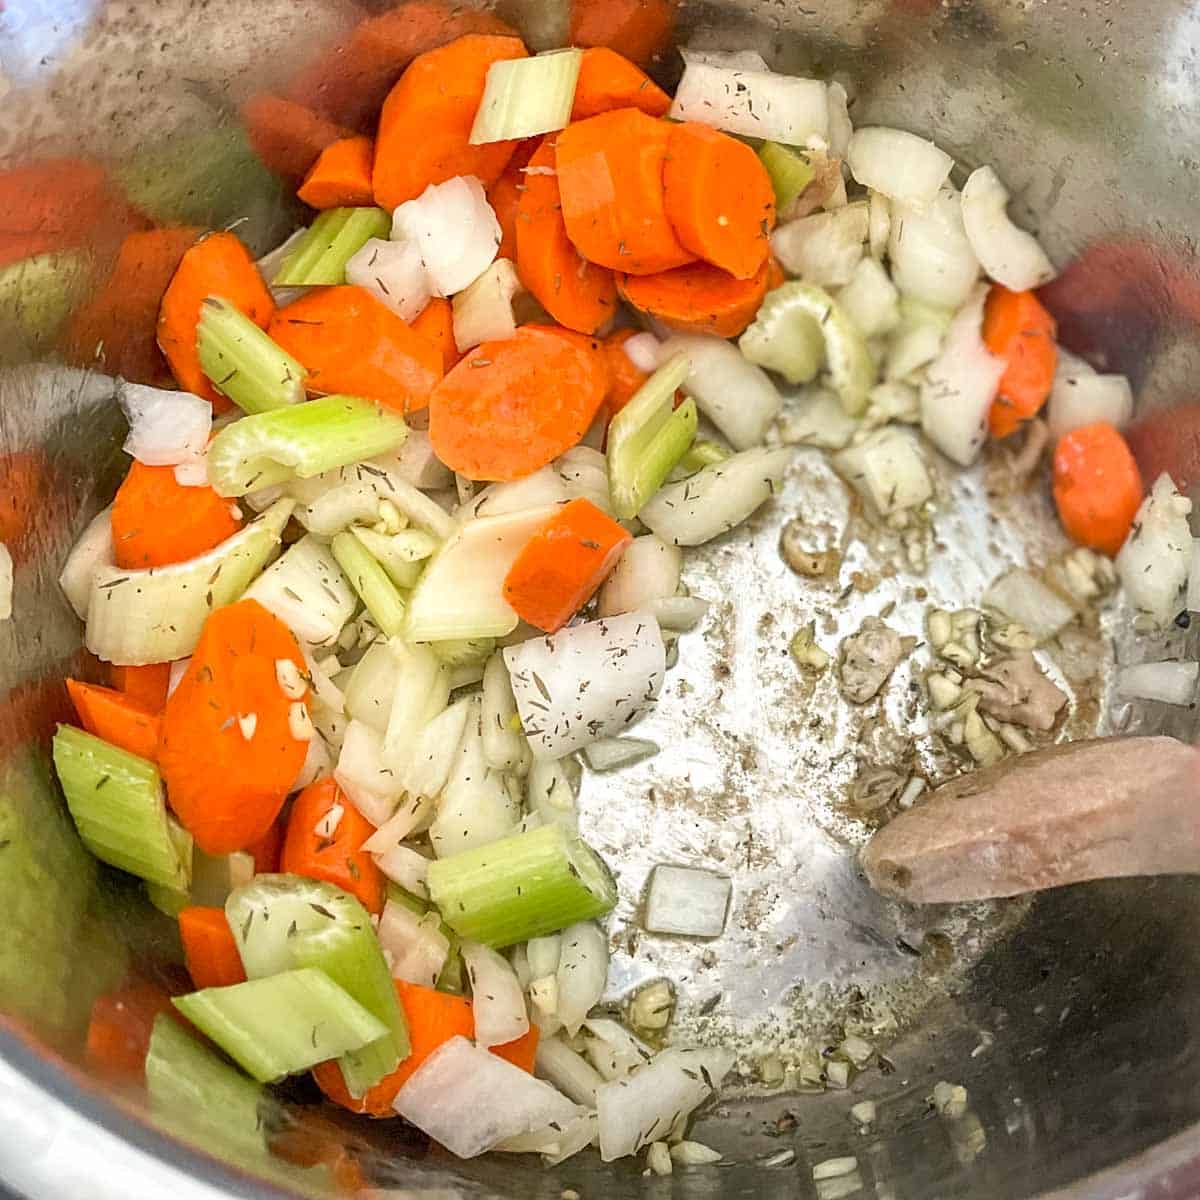 Sliced carrots, celery, chopped onions and garlic, olive oil, and thyme are shown in the instant pot, stirred with a wooden spoon.